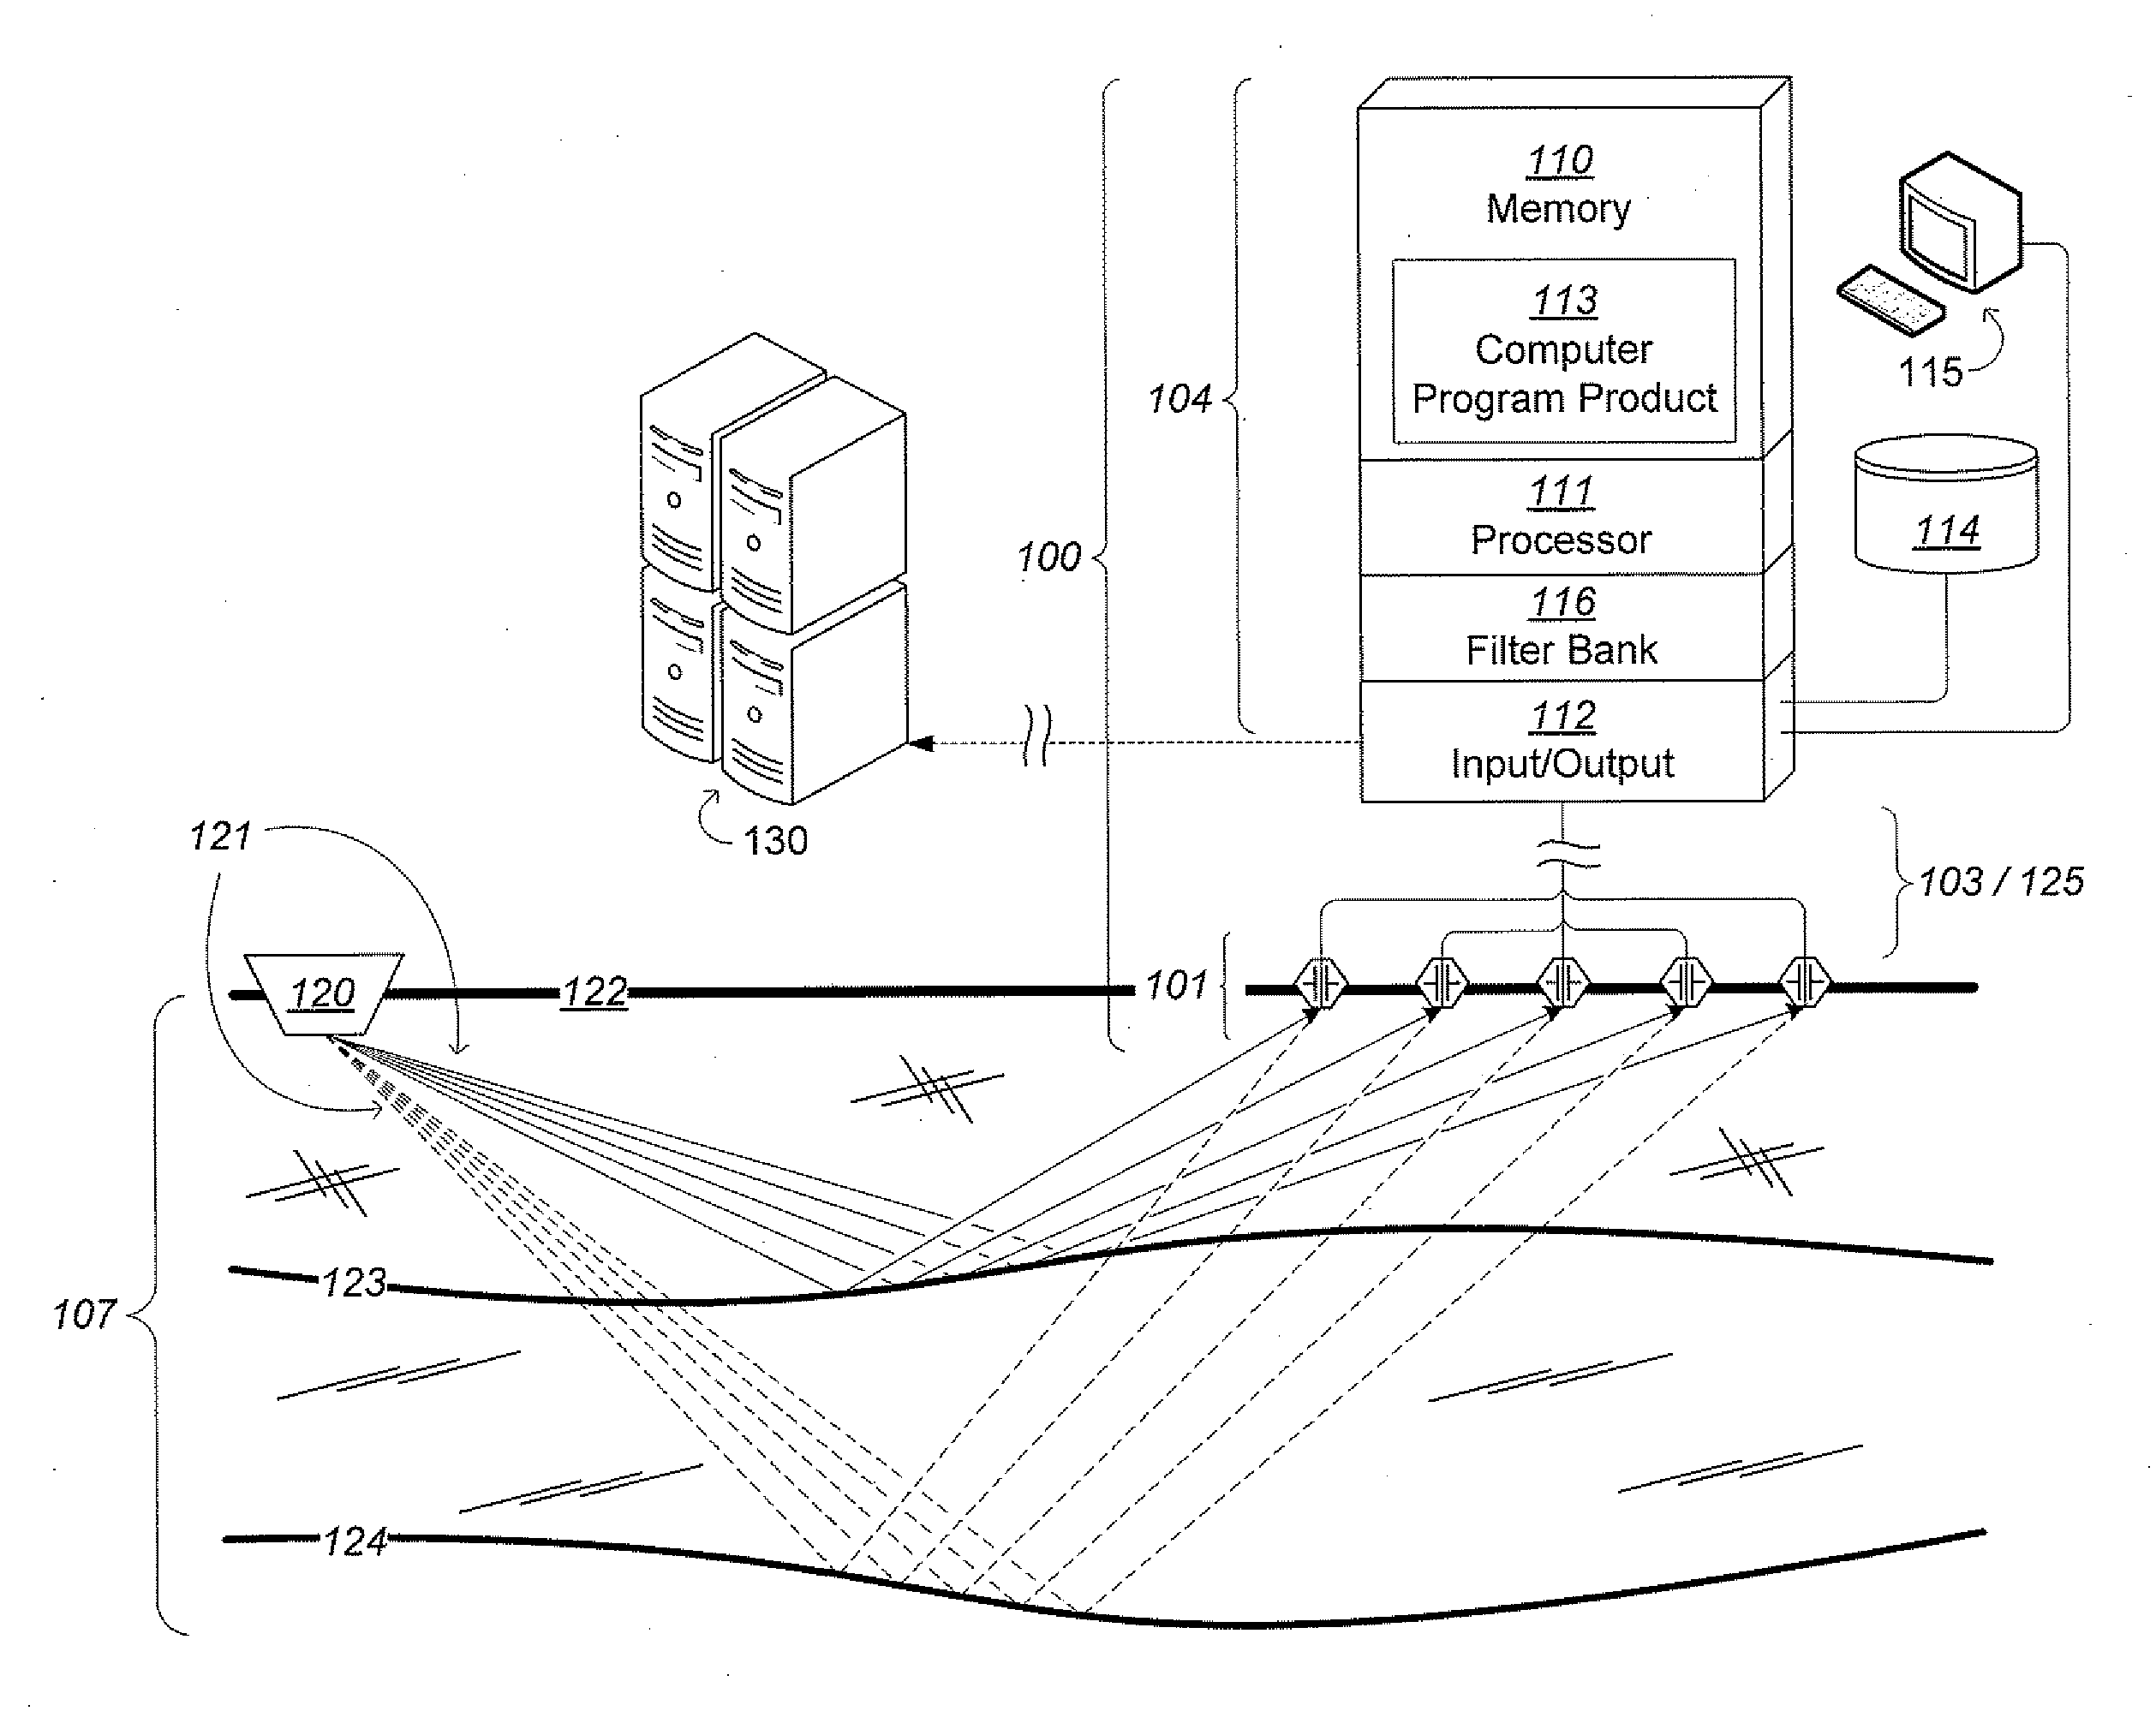 System, machine, and computer-readable storage medium for forming an enhanced seismic trace using a virtual seismic array